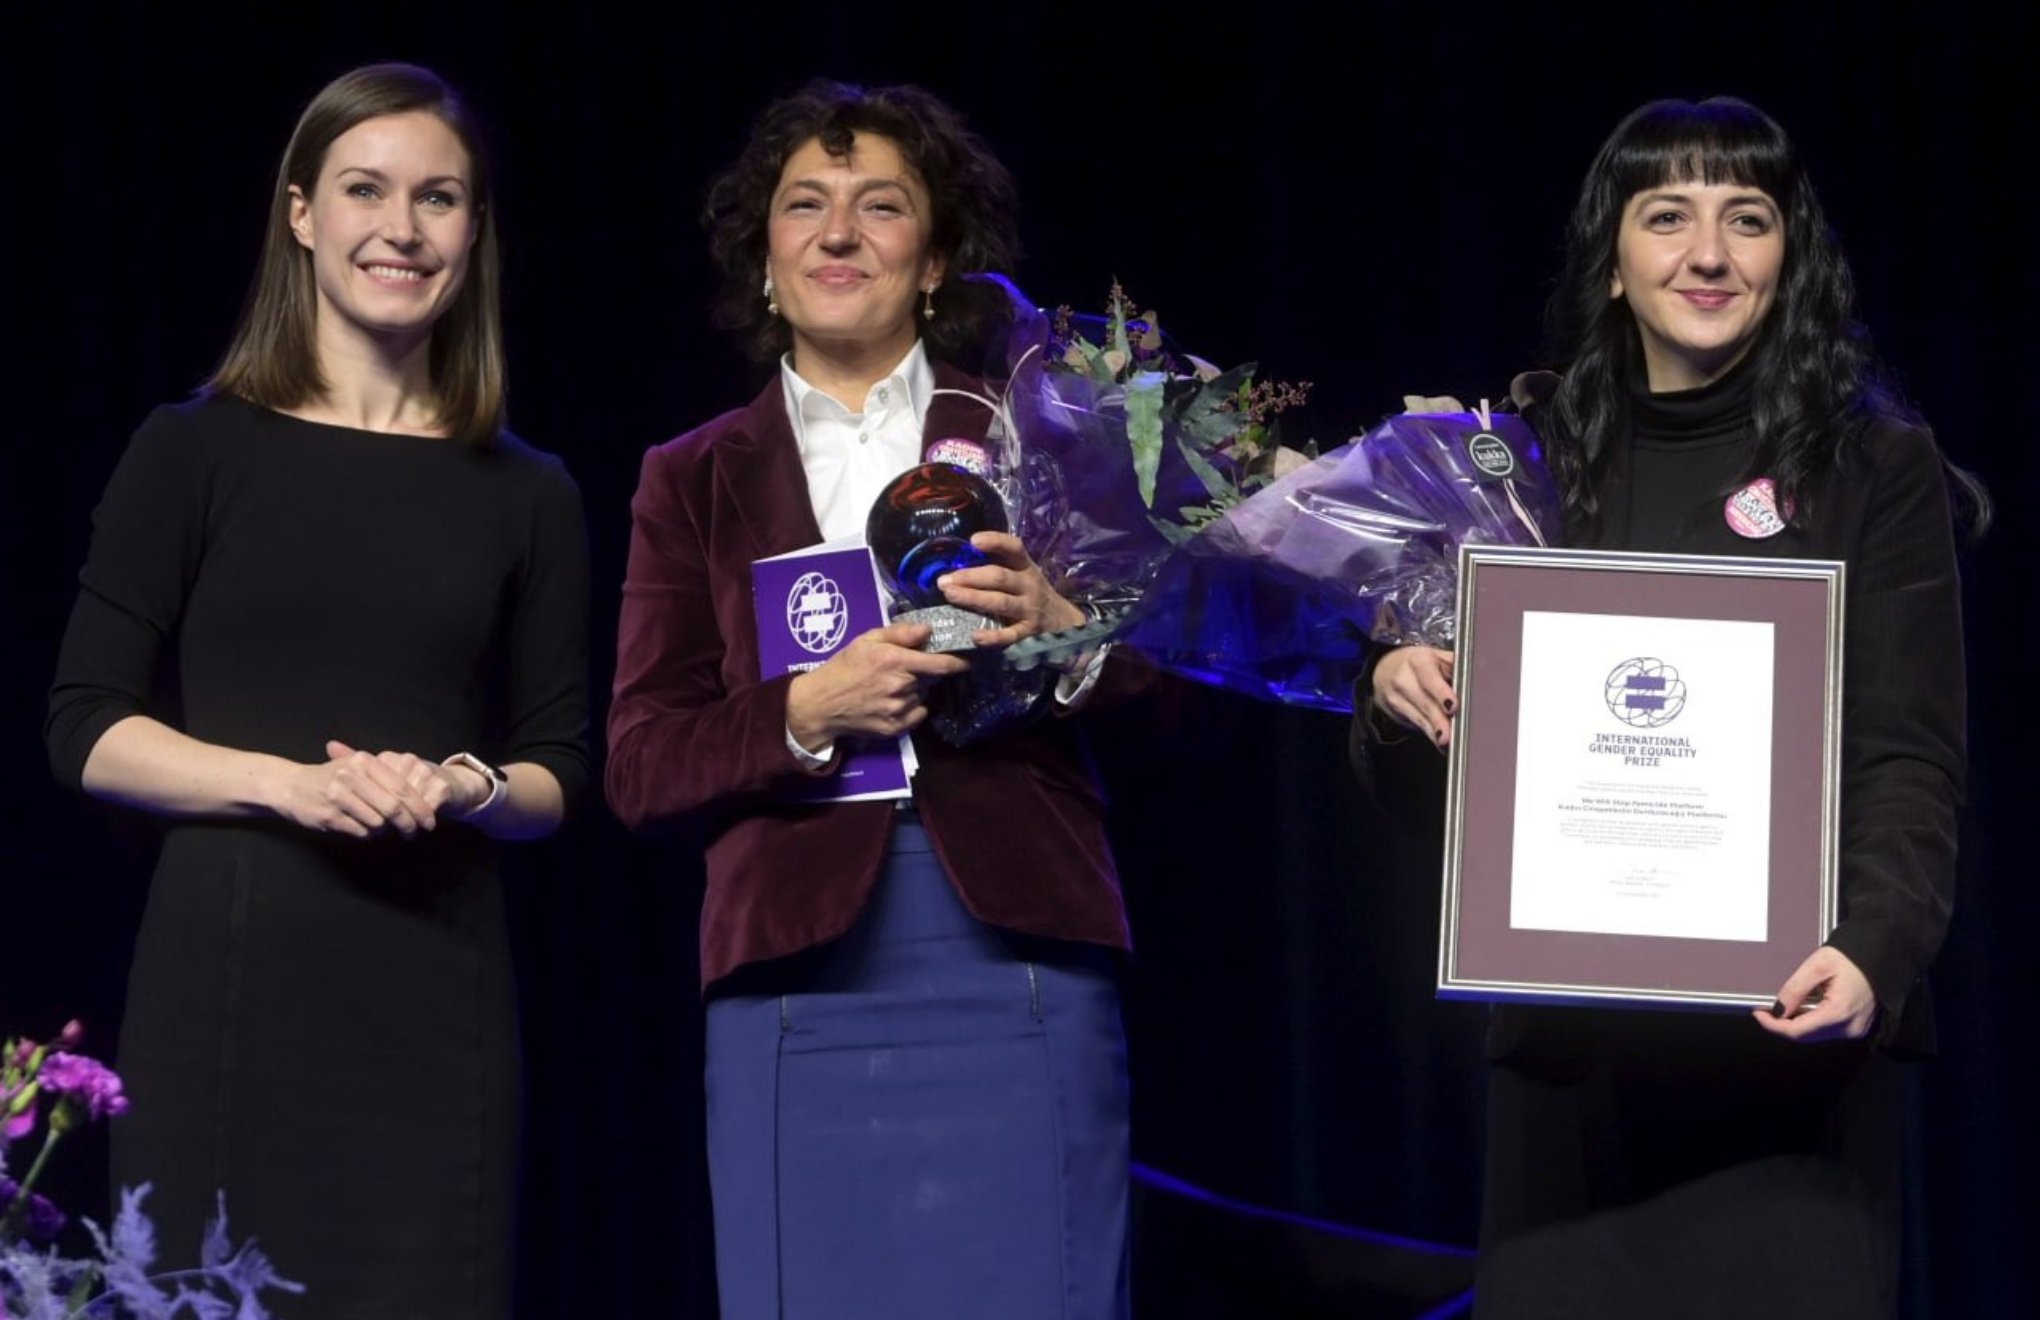 Finland's gender equality prize granted to We Will Stop Femicides Platform